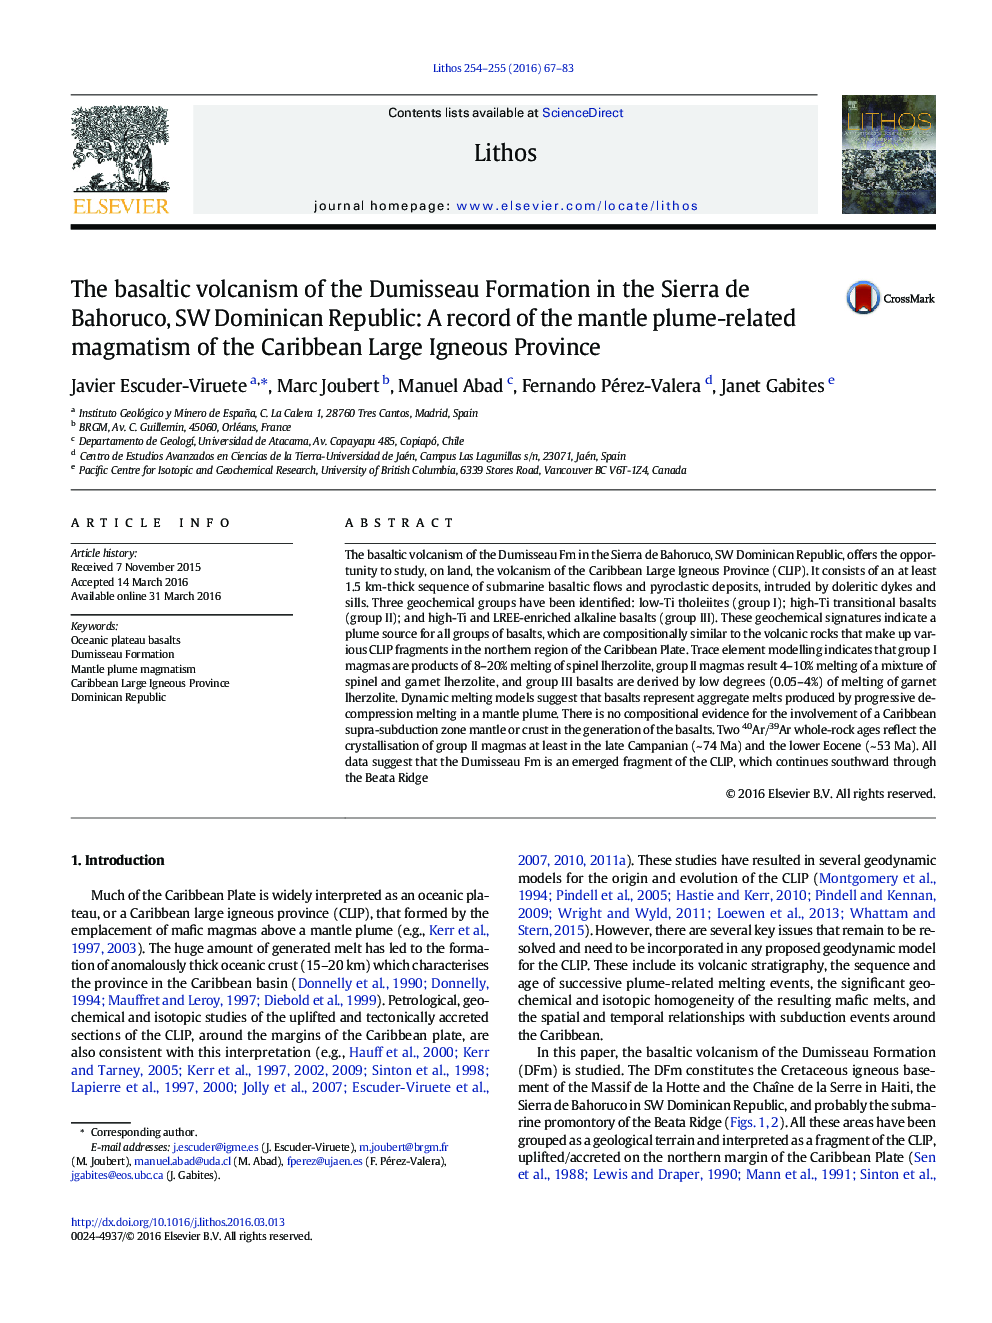 The basaltic volcanism of the Dumisseau Formation in the Sierra de Bahoruco, SW Dominican Republic: A record of the mantle plume-related magmatism of the Caribbean Large Igneous Province